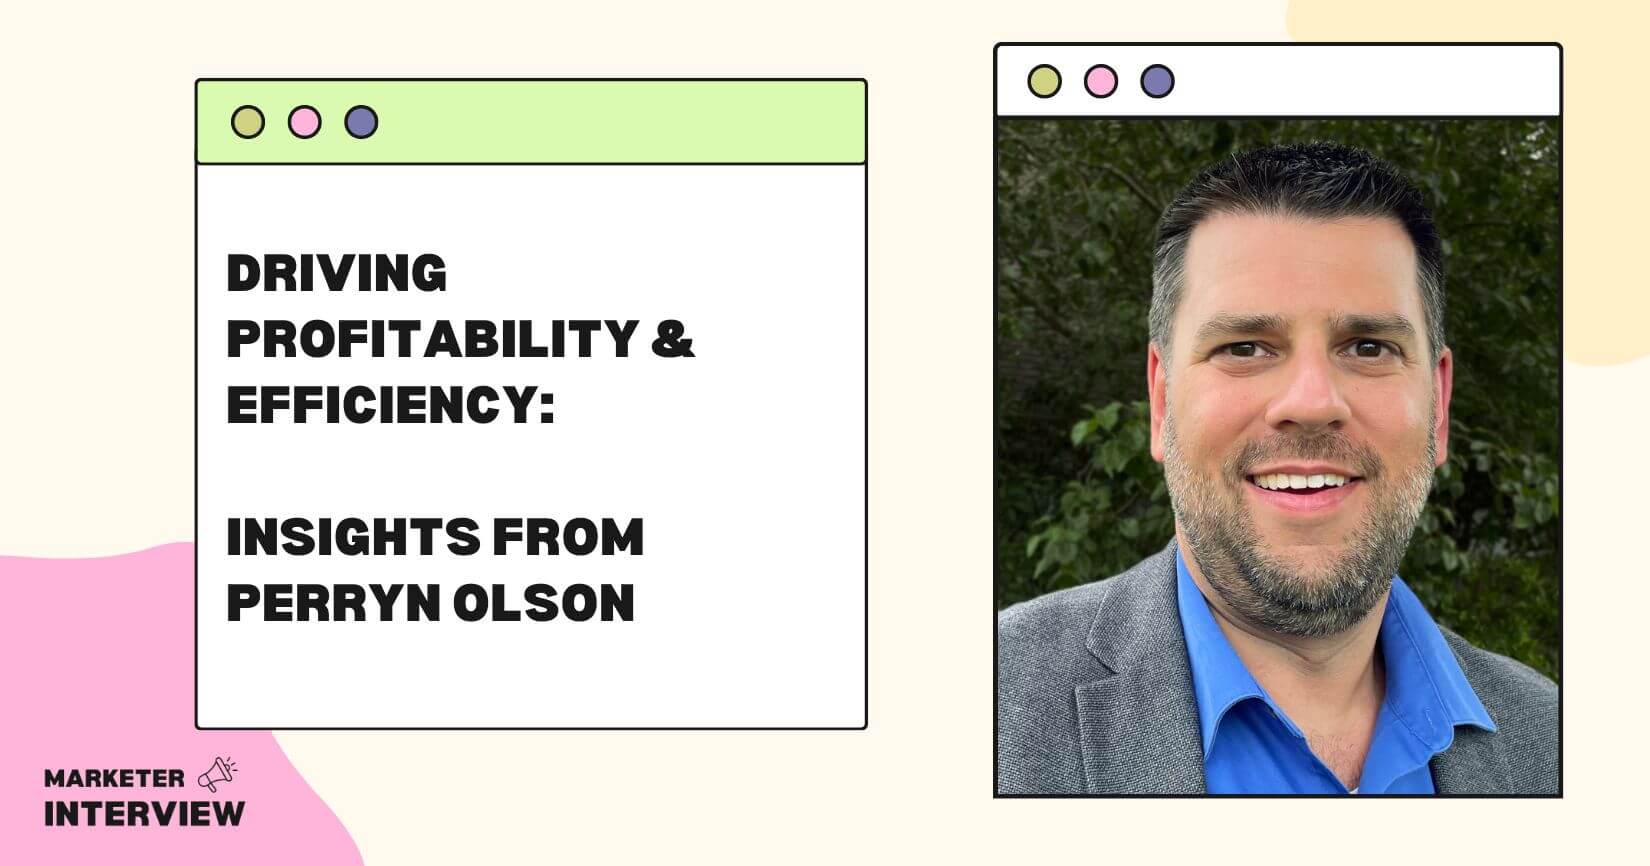 Driving Profitability & Efficiency: Insights from Perryn Olson